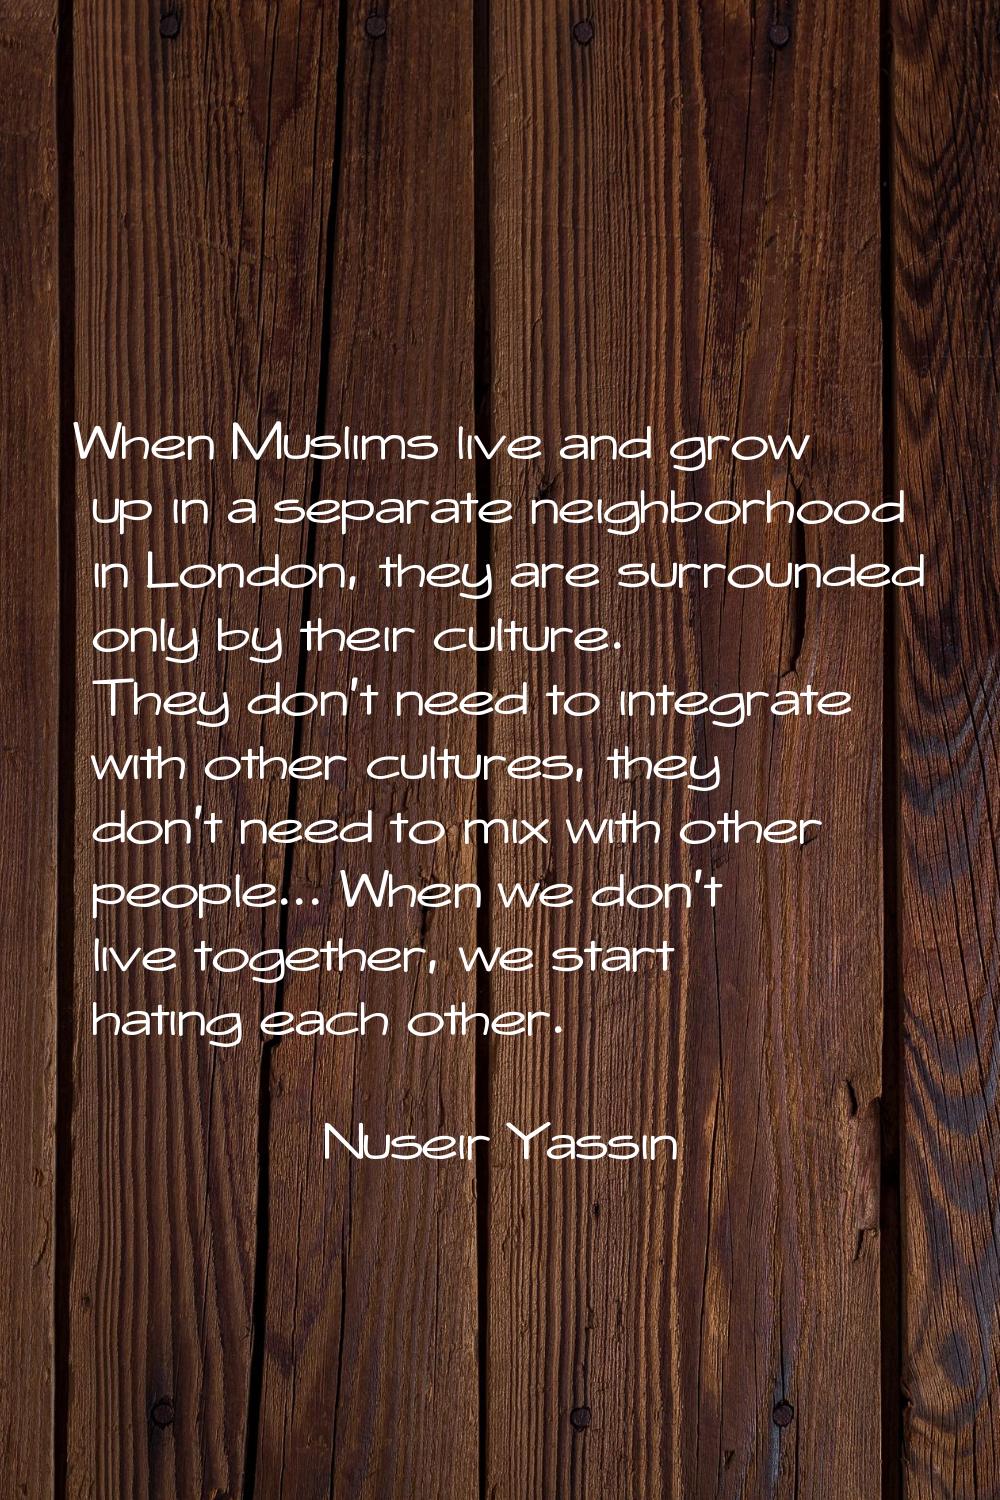 When Muslims live and grow up in a separate neighborhood in London, they are surrounded only by the